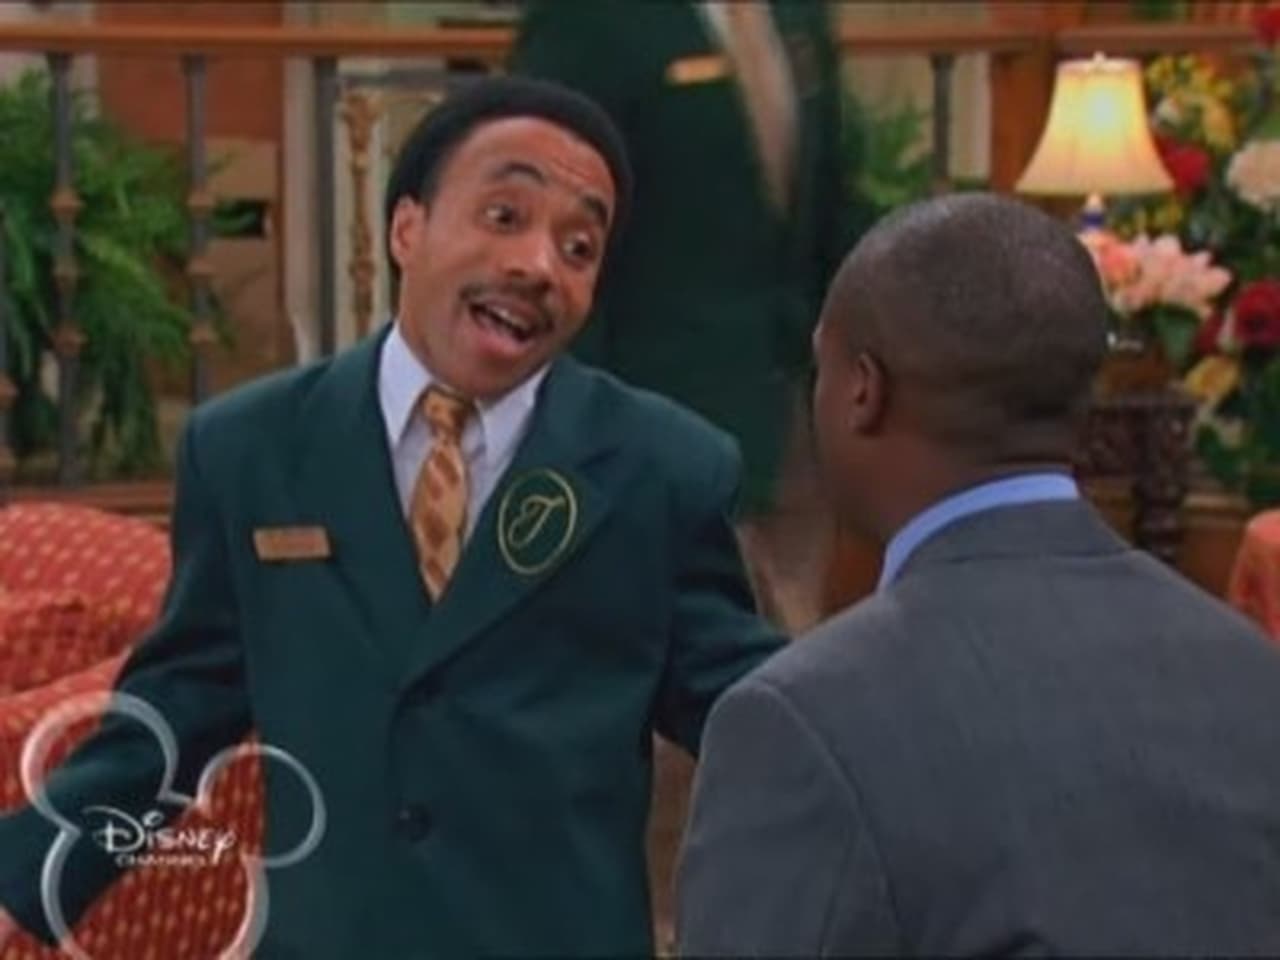 The Suite Life of Zack & Cody - Season 2 Episode 8 : Moseby's Big Brother